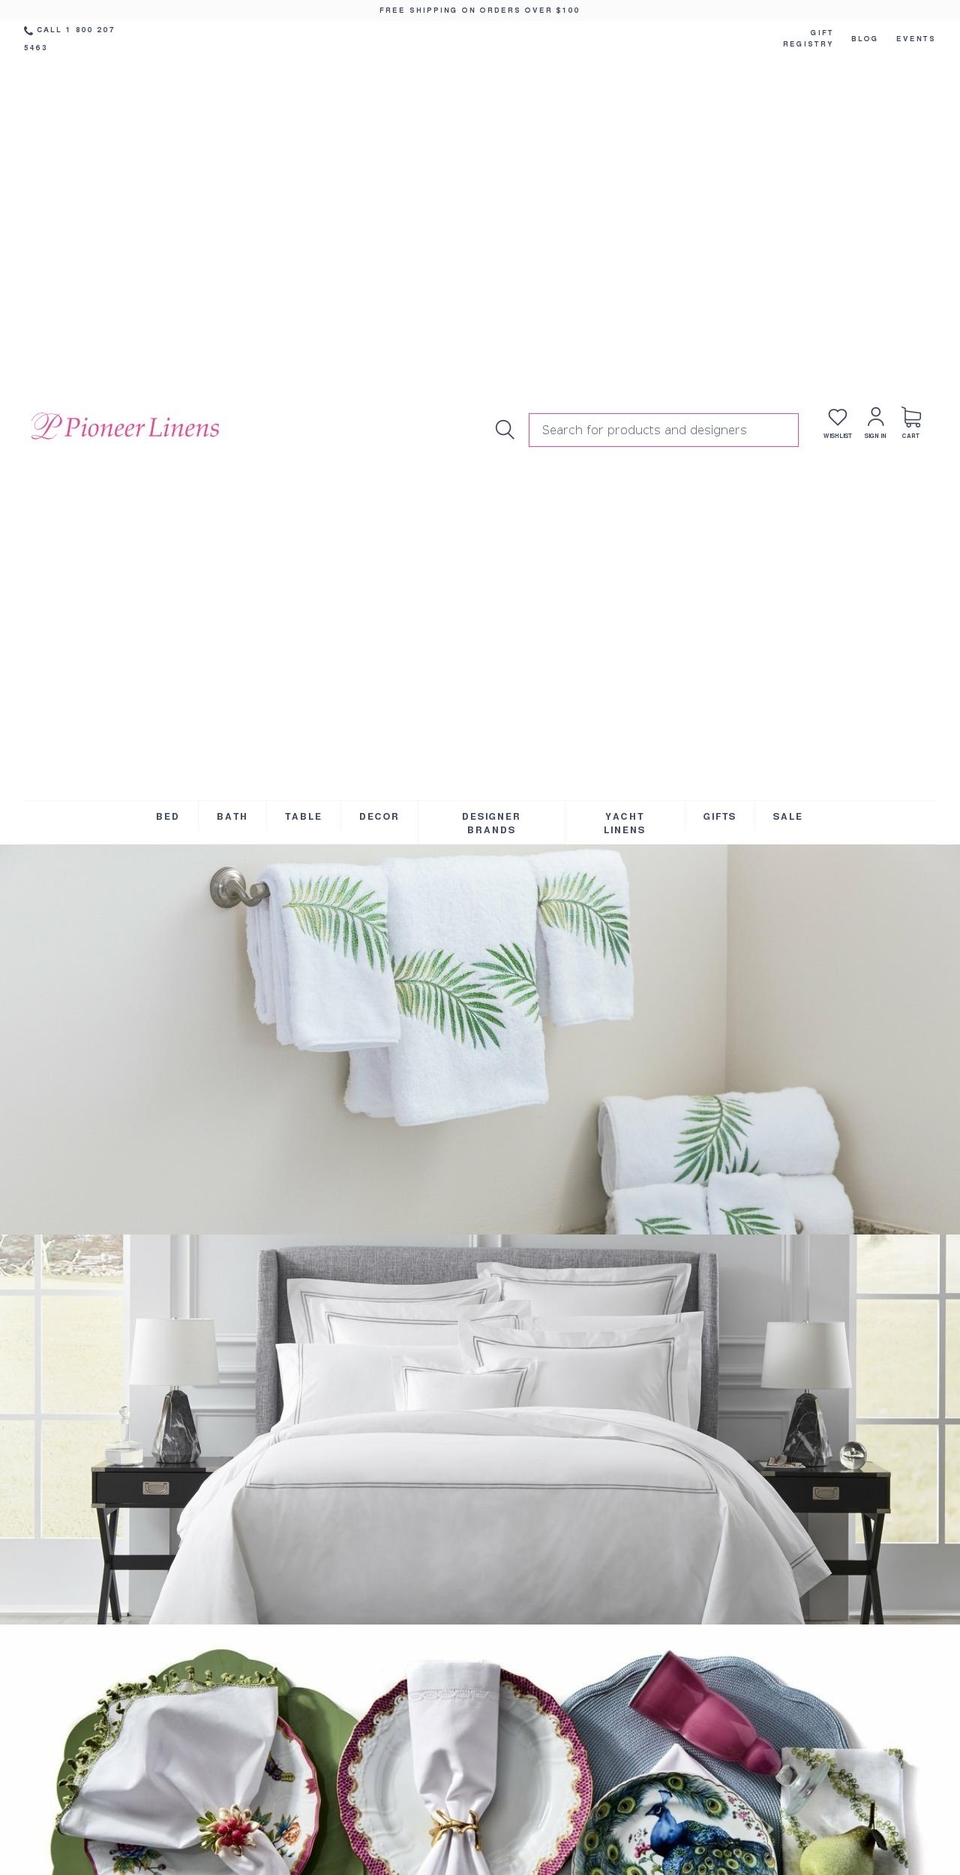 Buko Shopify Theme - Products Consolidation Shopify theme site example luxurycottontowels.com